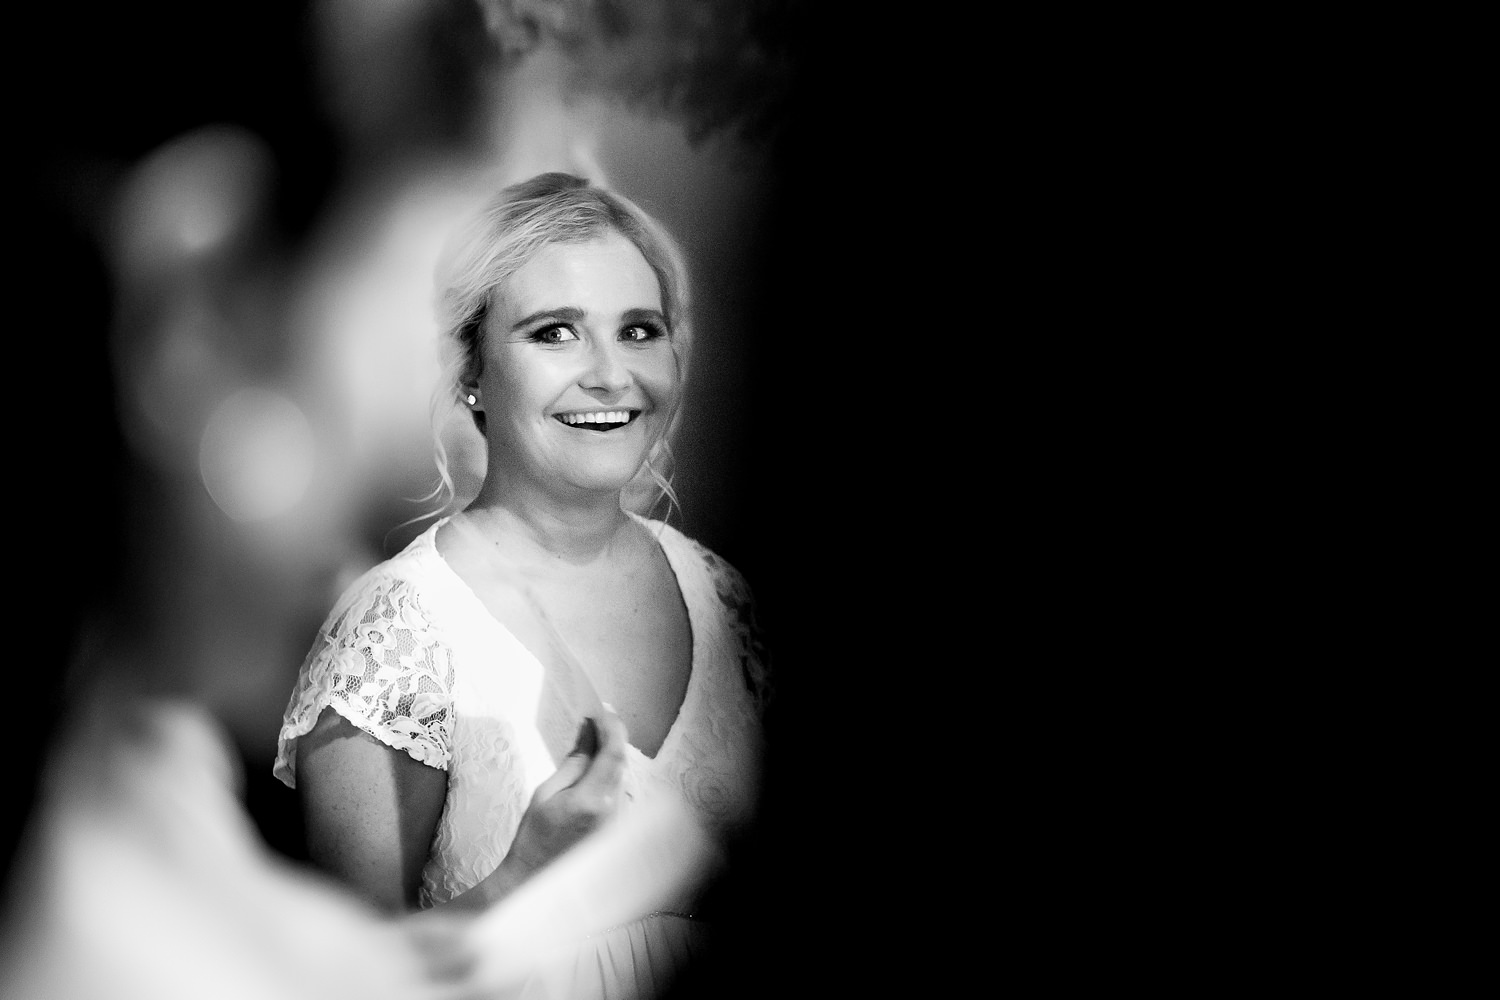 The bride looks at her bridesmaids with a huge smile on her face during a hymn by wedding photographer in South Africa, Niki M Photography